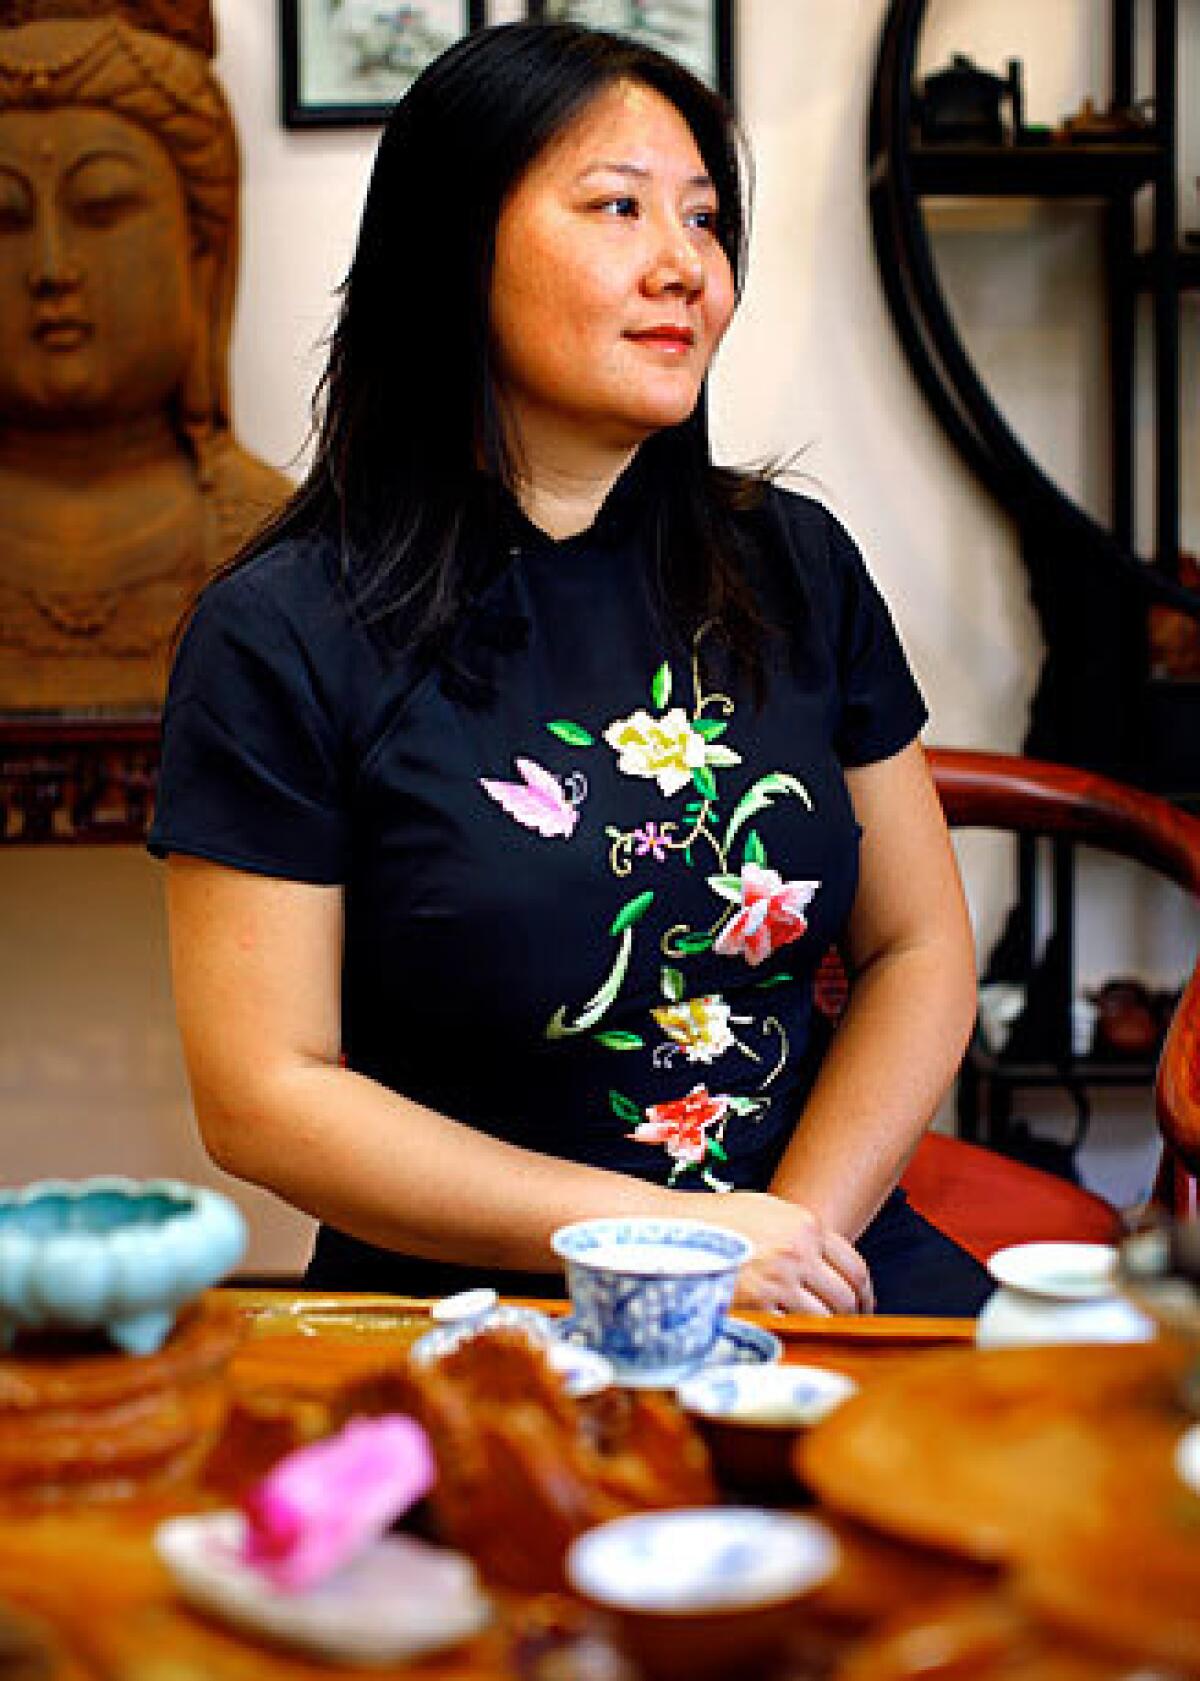 "There's a transcending level of this tea. It's a very personal, life-altering experience," Imen Shan says.